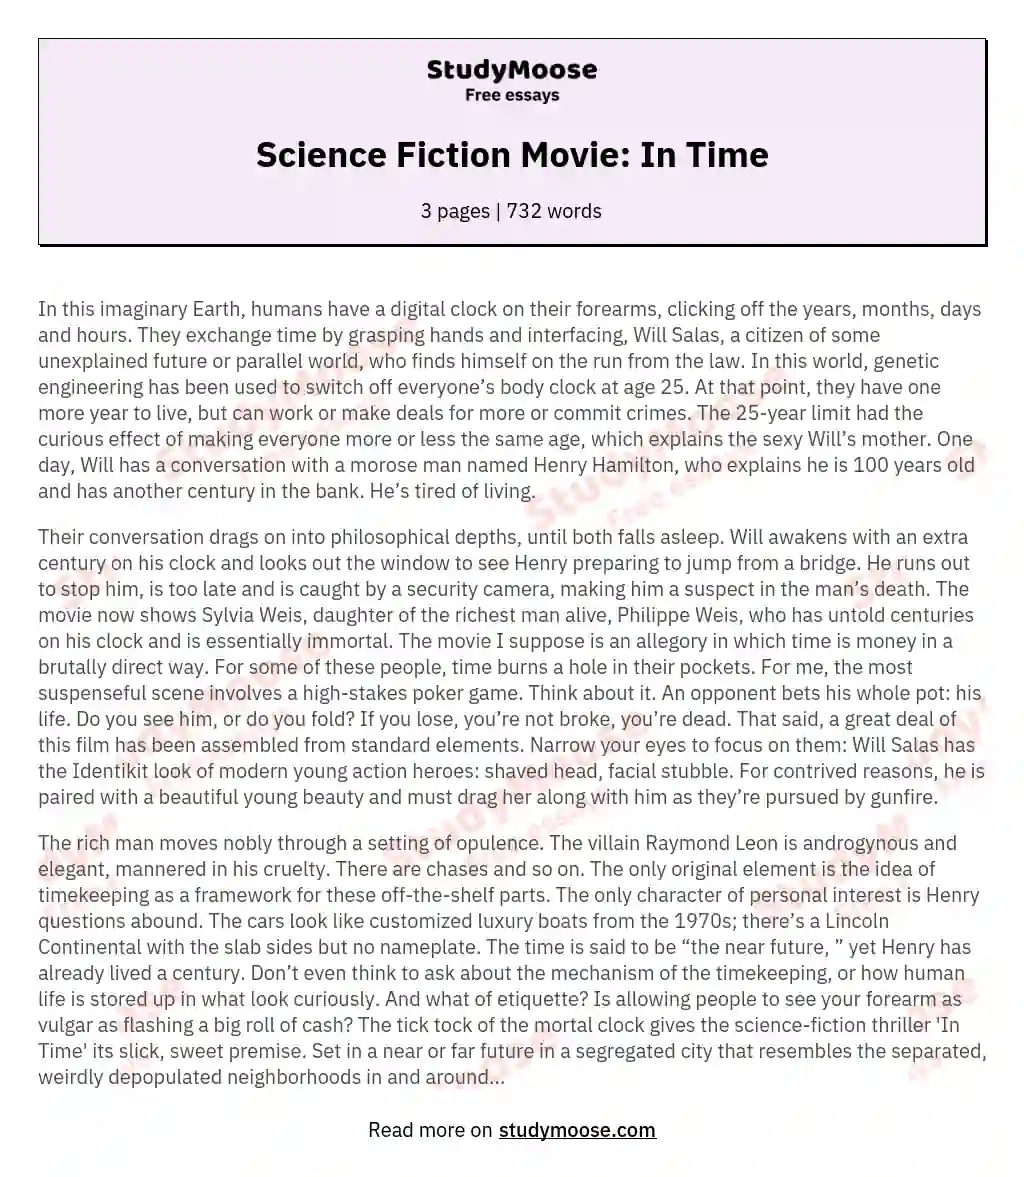 Science Fiction Movie: In Time essay